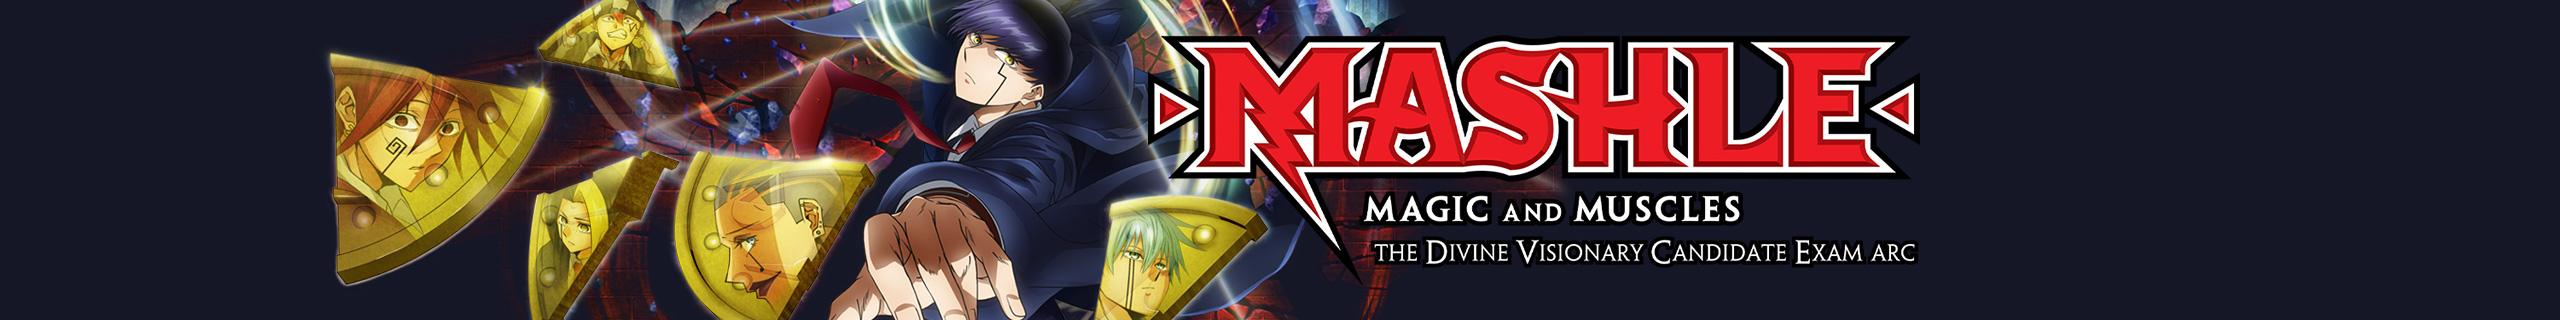 Mashle: Magic and Muscles - The Divine Visionary Candidate Exam Arc Banner